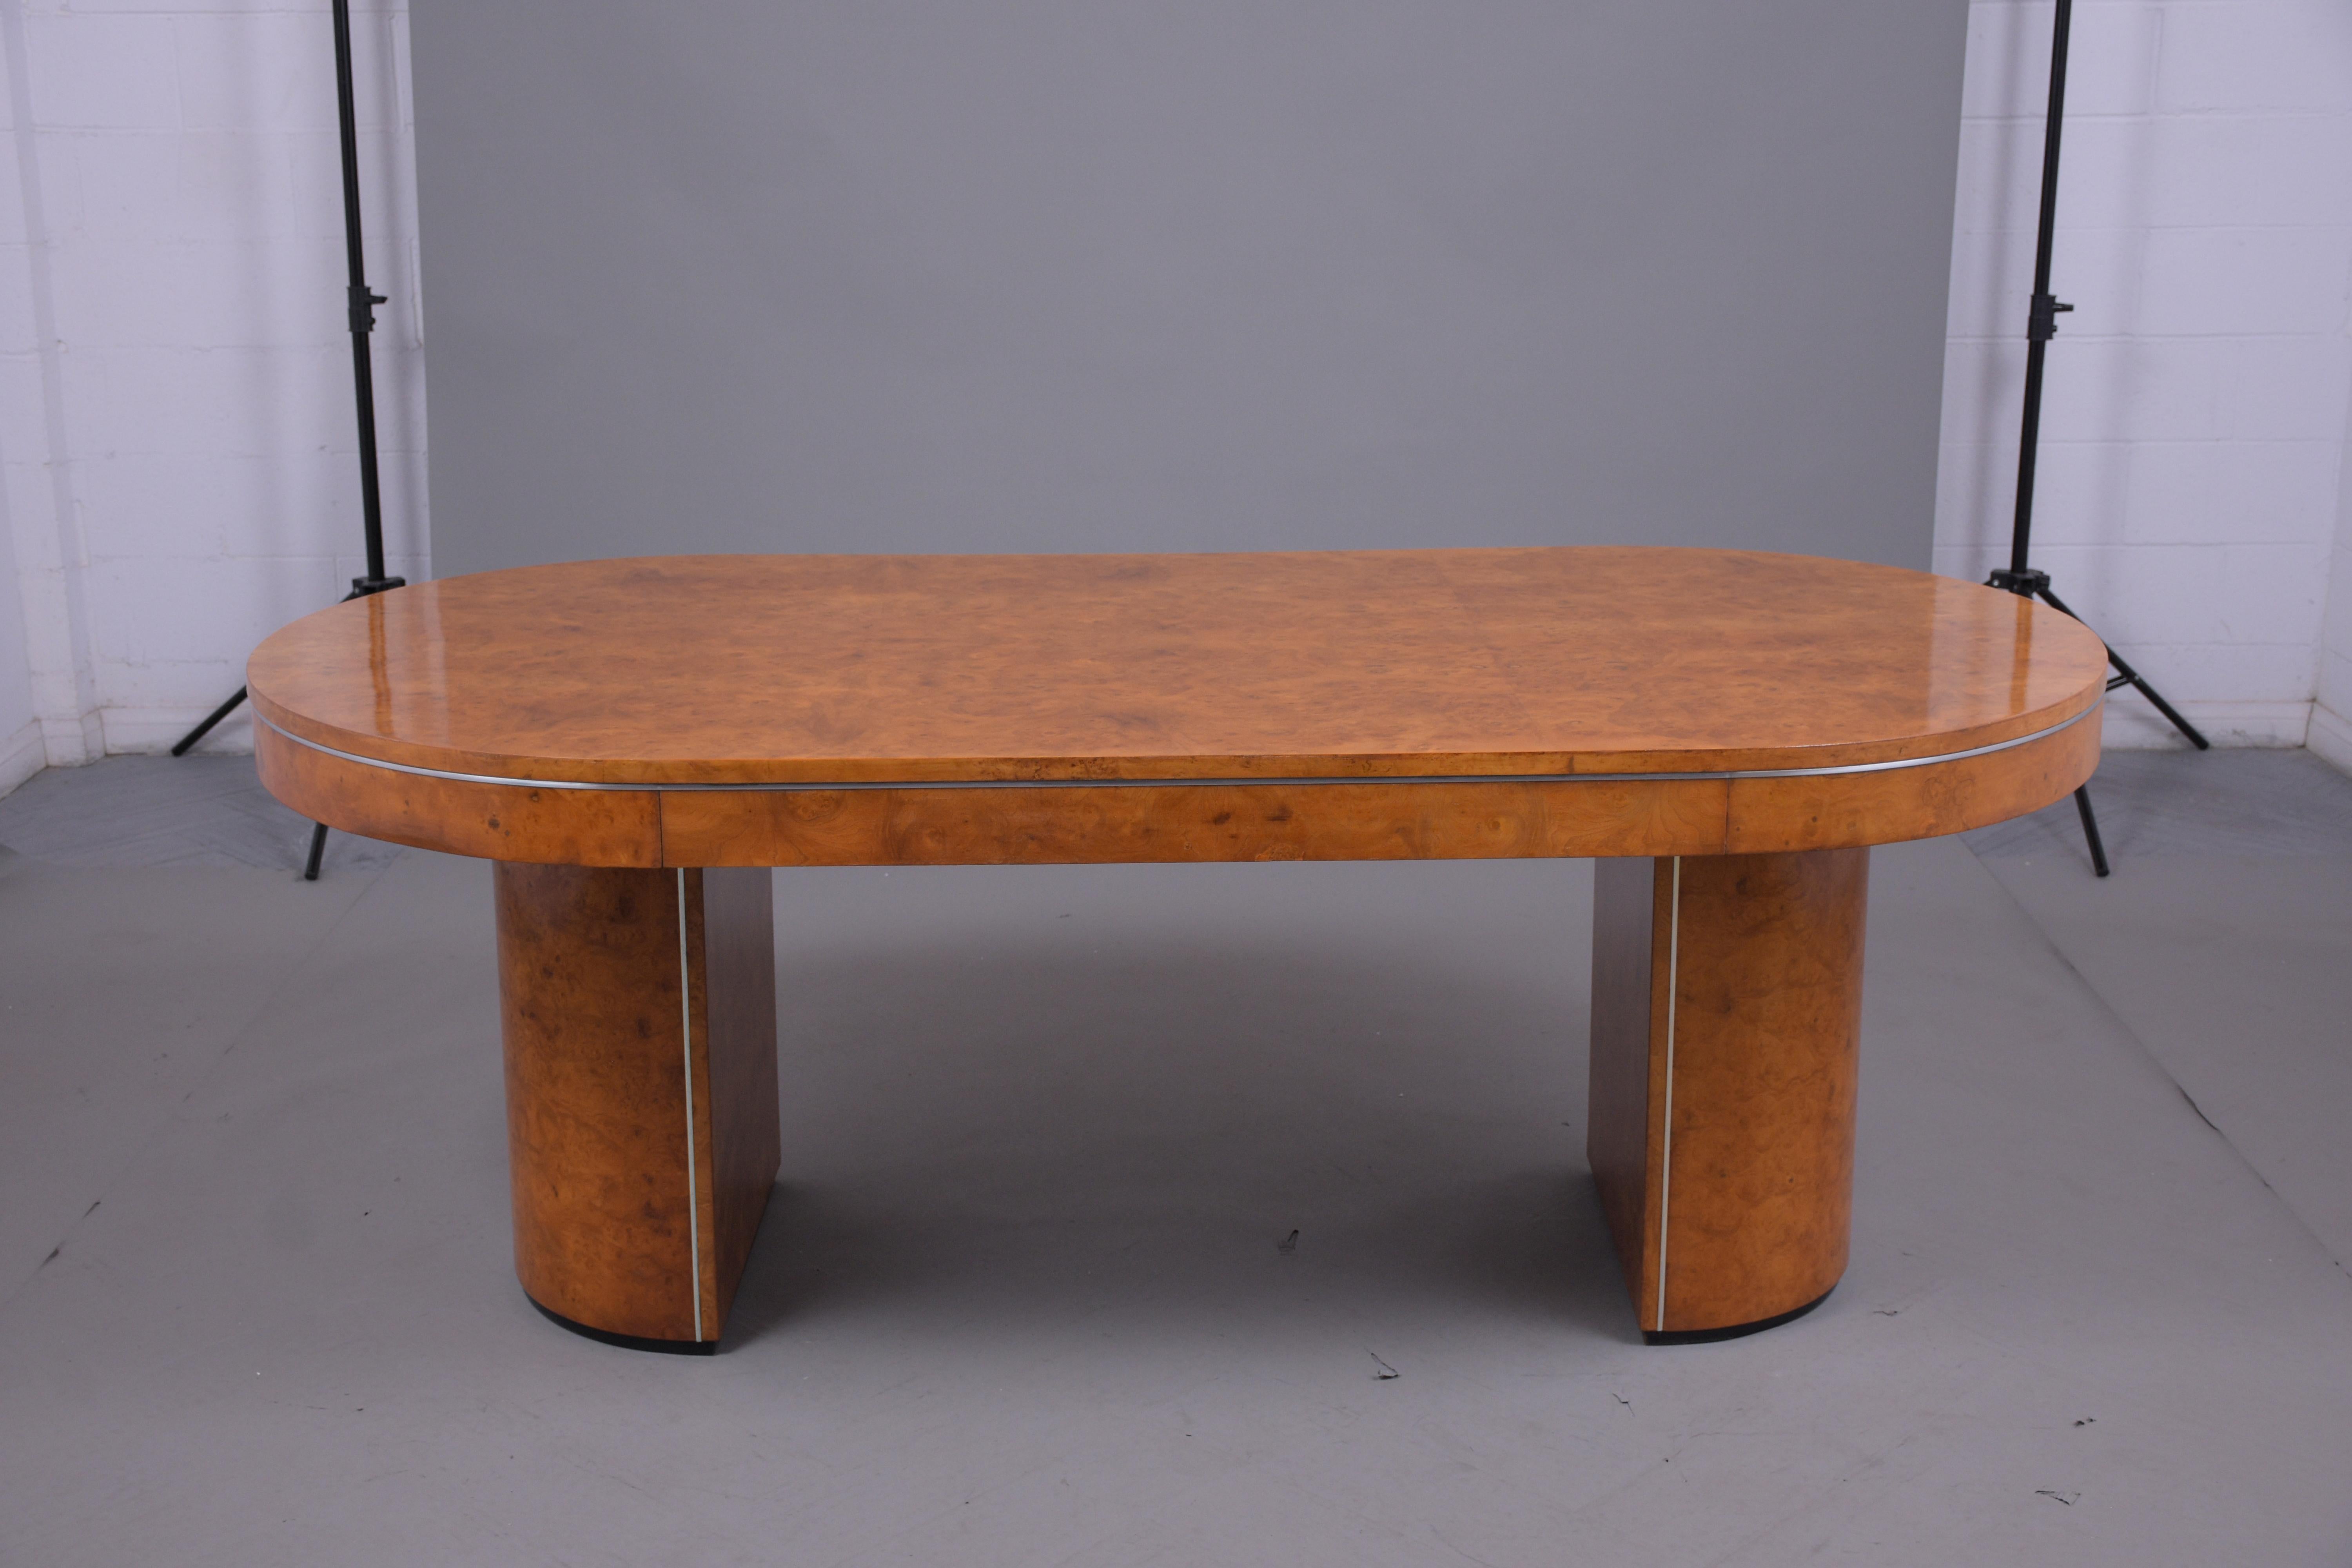 An elegant Art Deco dining table hand-crafted out of wood and exotic veneers, the table has been professionally restored and newly stained finish. This Mid-Century Modern executive table features a rich golden color with a remarkable lacquered